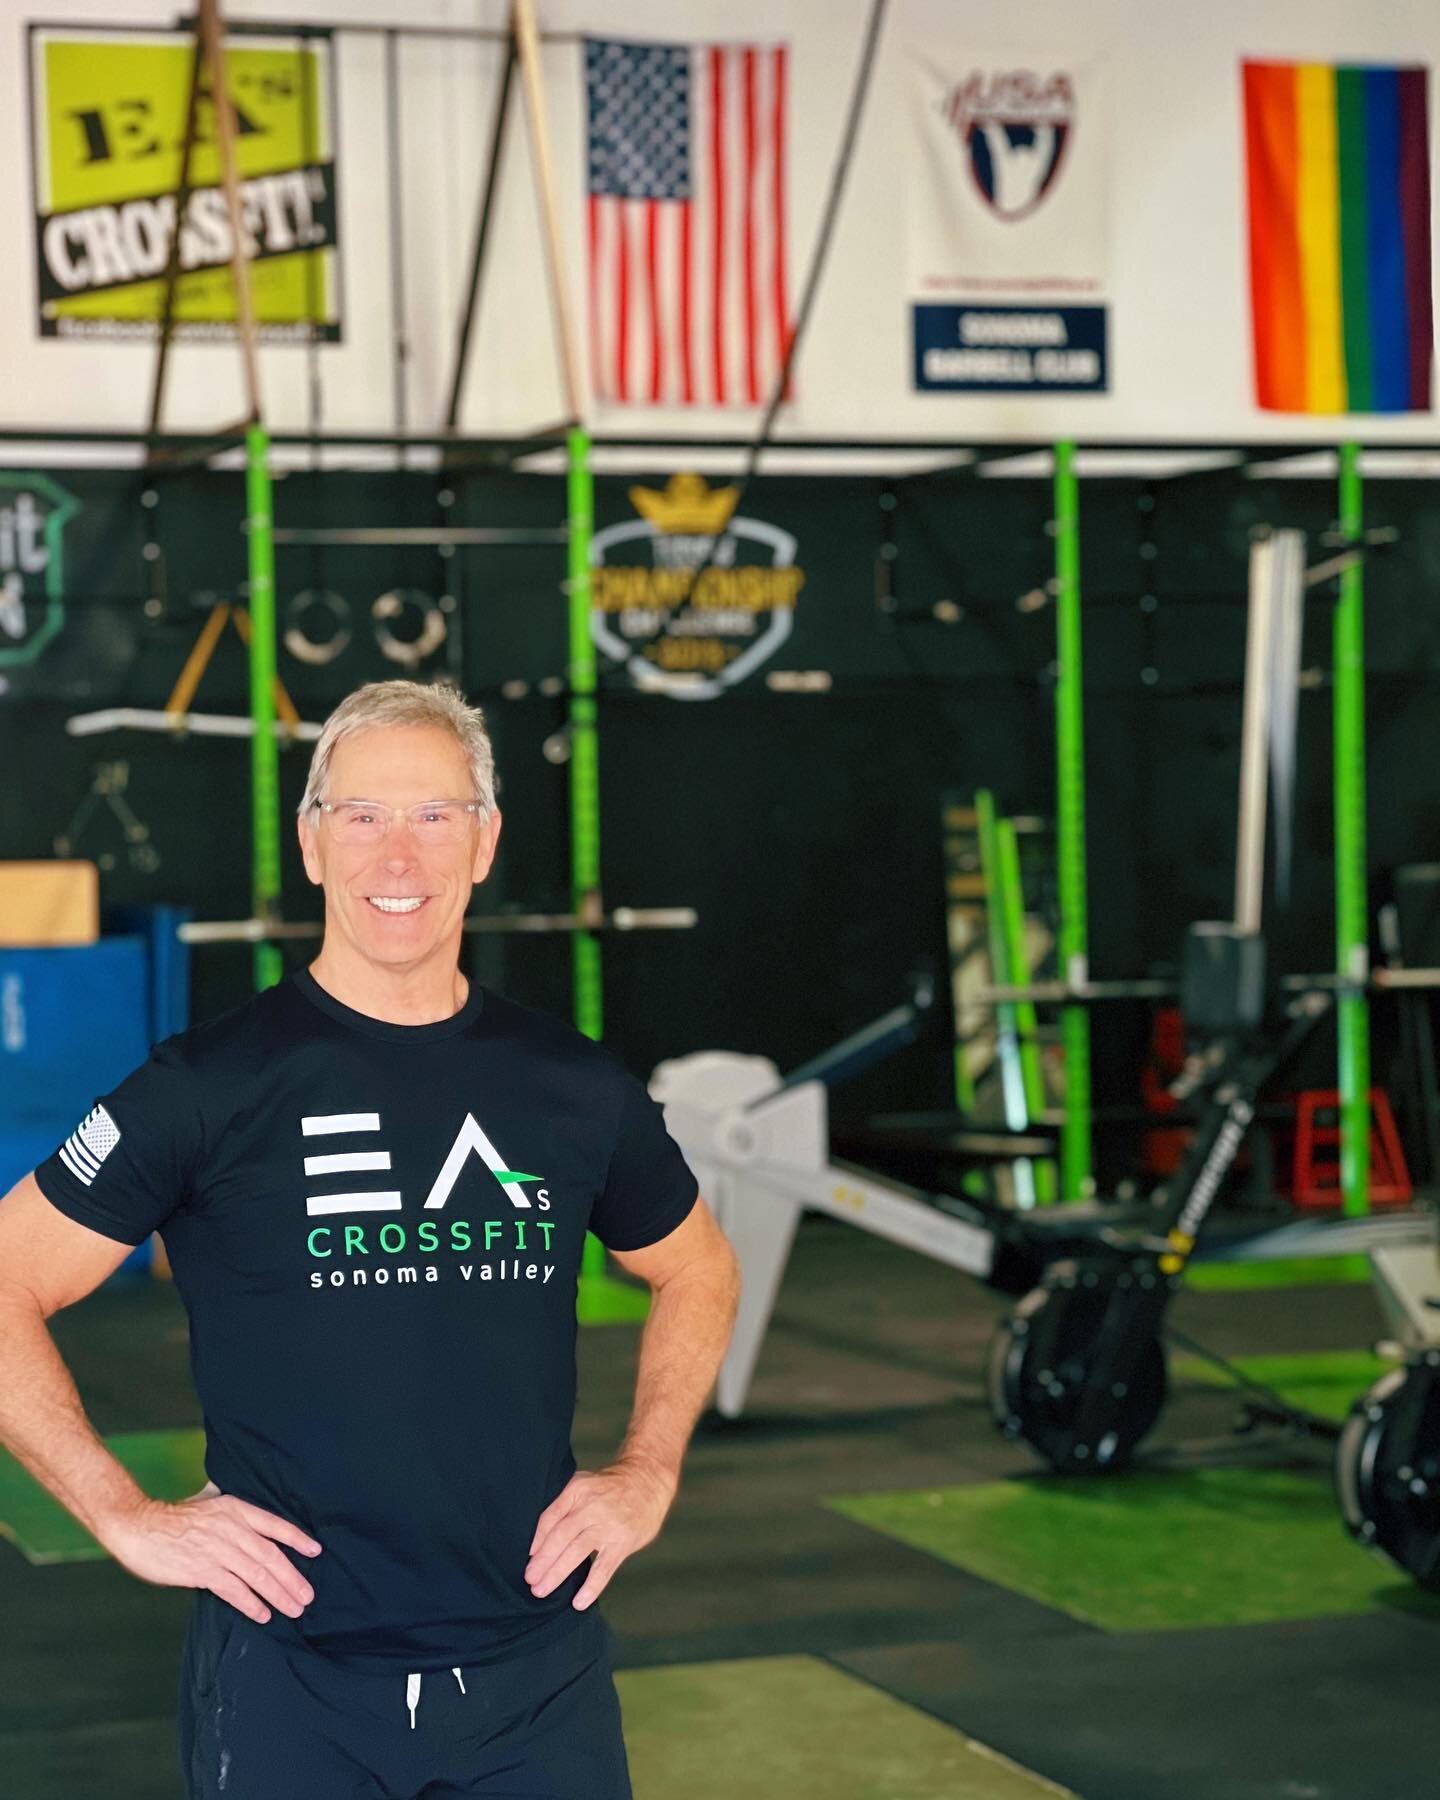 | Oh My WOD! Look Good and Feel Good @eascrossfit | New Gear Available NOW! #eascrossfit #allwelcome #crossfit #community #wod #fit #fitness #gym #sonoma #sonomavalley #sonomacounty #sonomastrong #sonoma